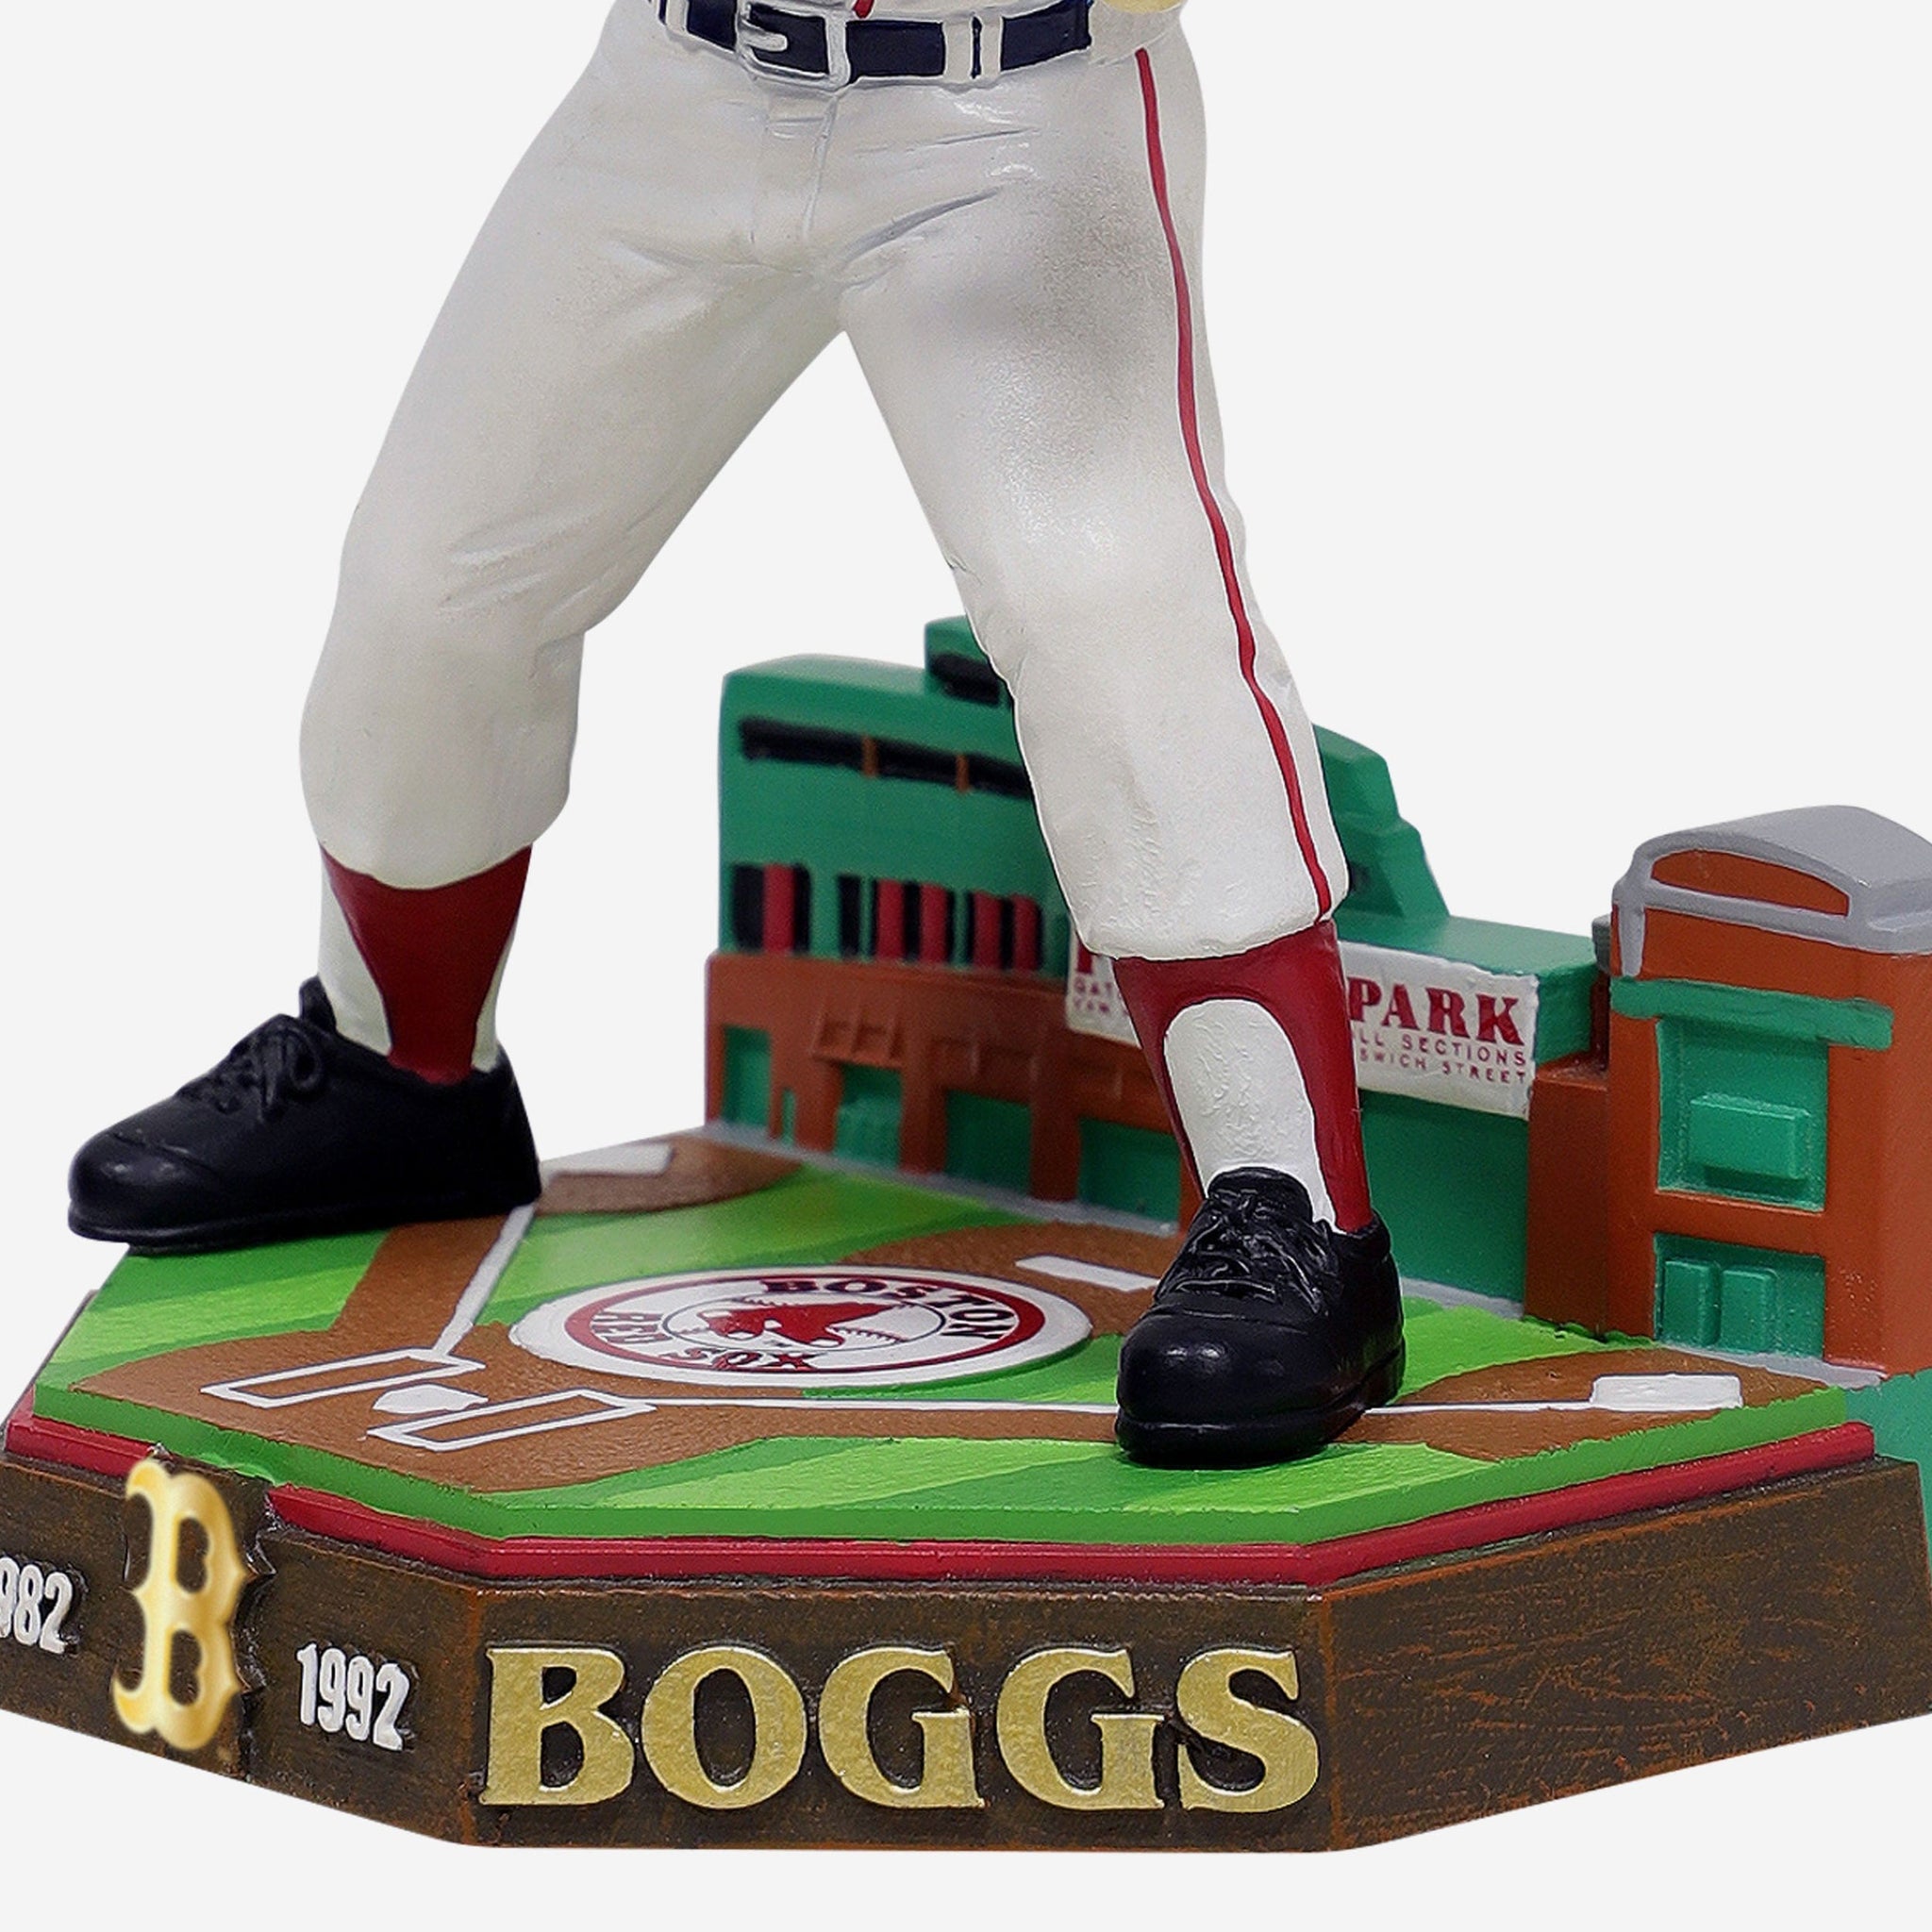 Wade Boggs attends bobblehead night at Trop